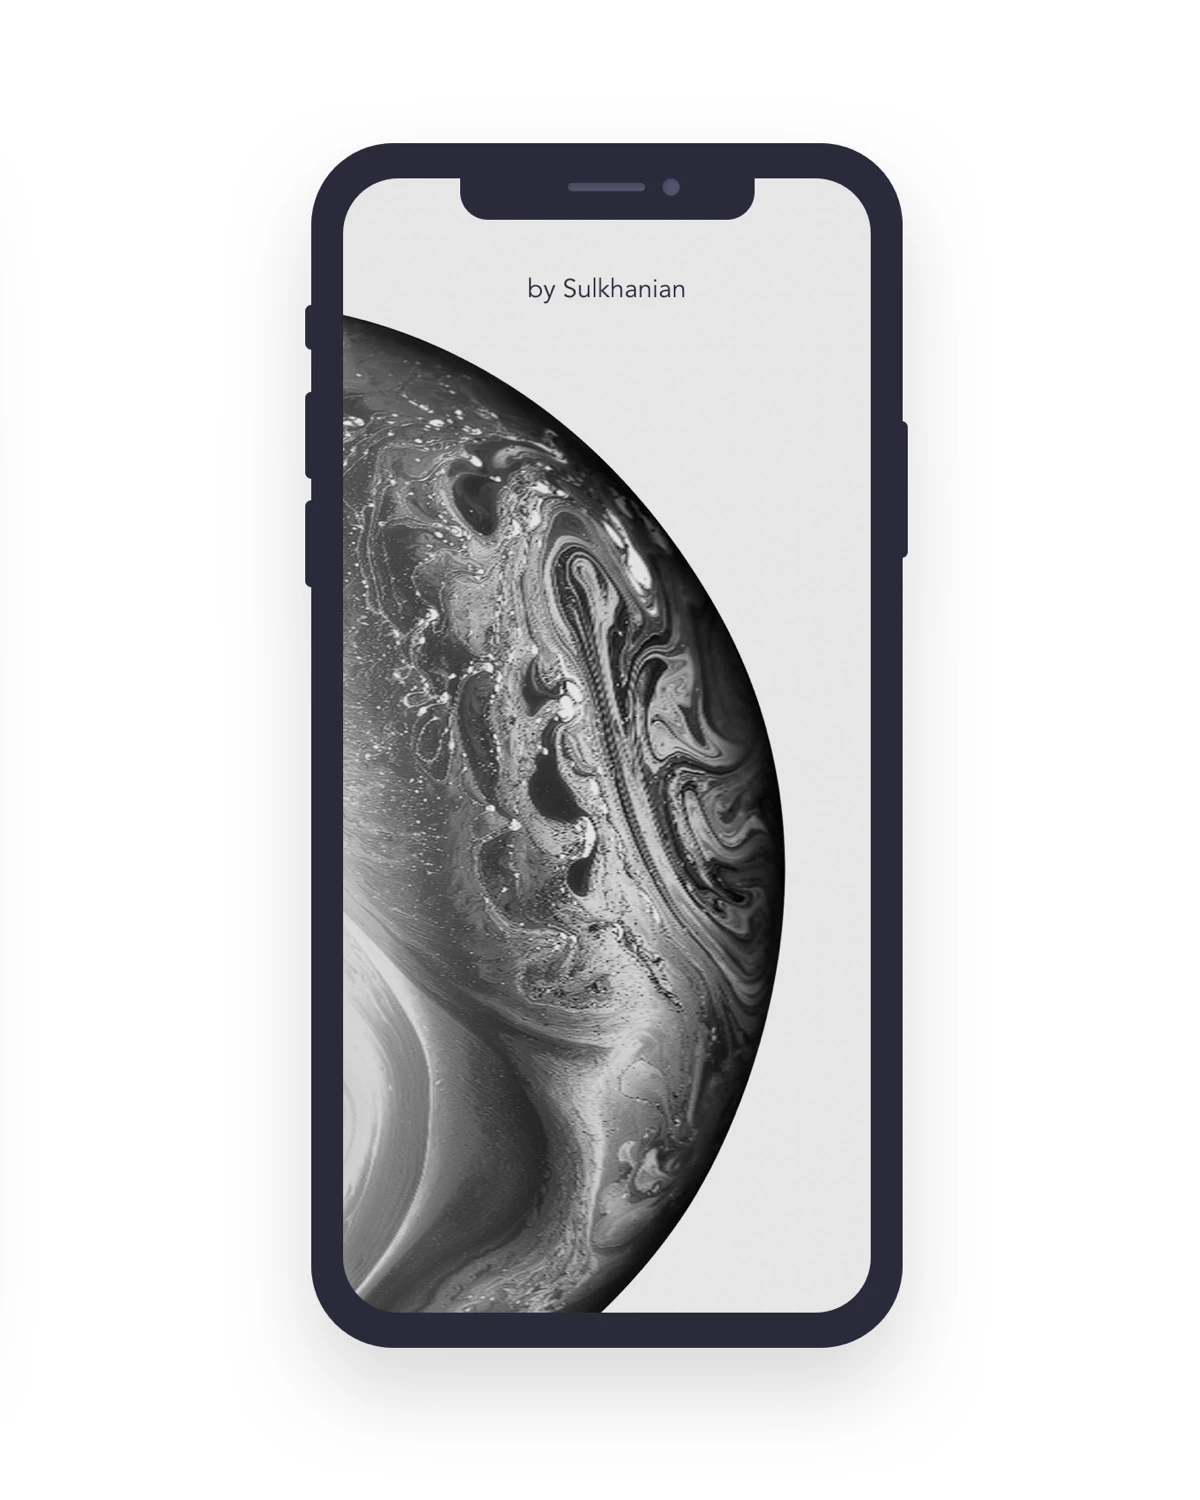 iPhone XS Super Flat Mockup - There is 3 versions: white, dark gray and dark blue